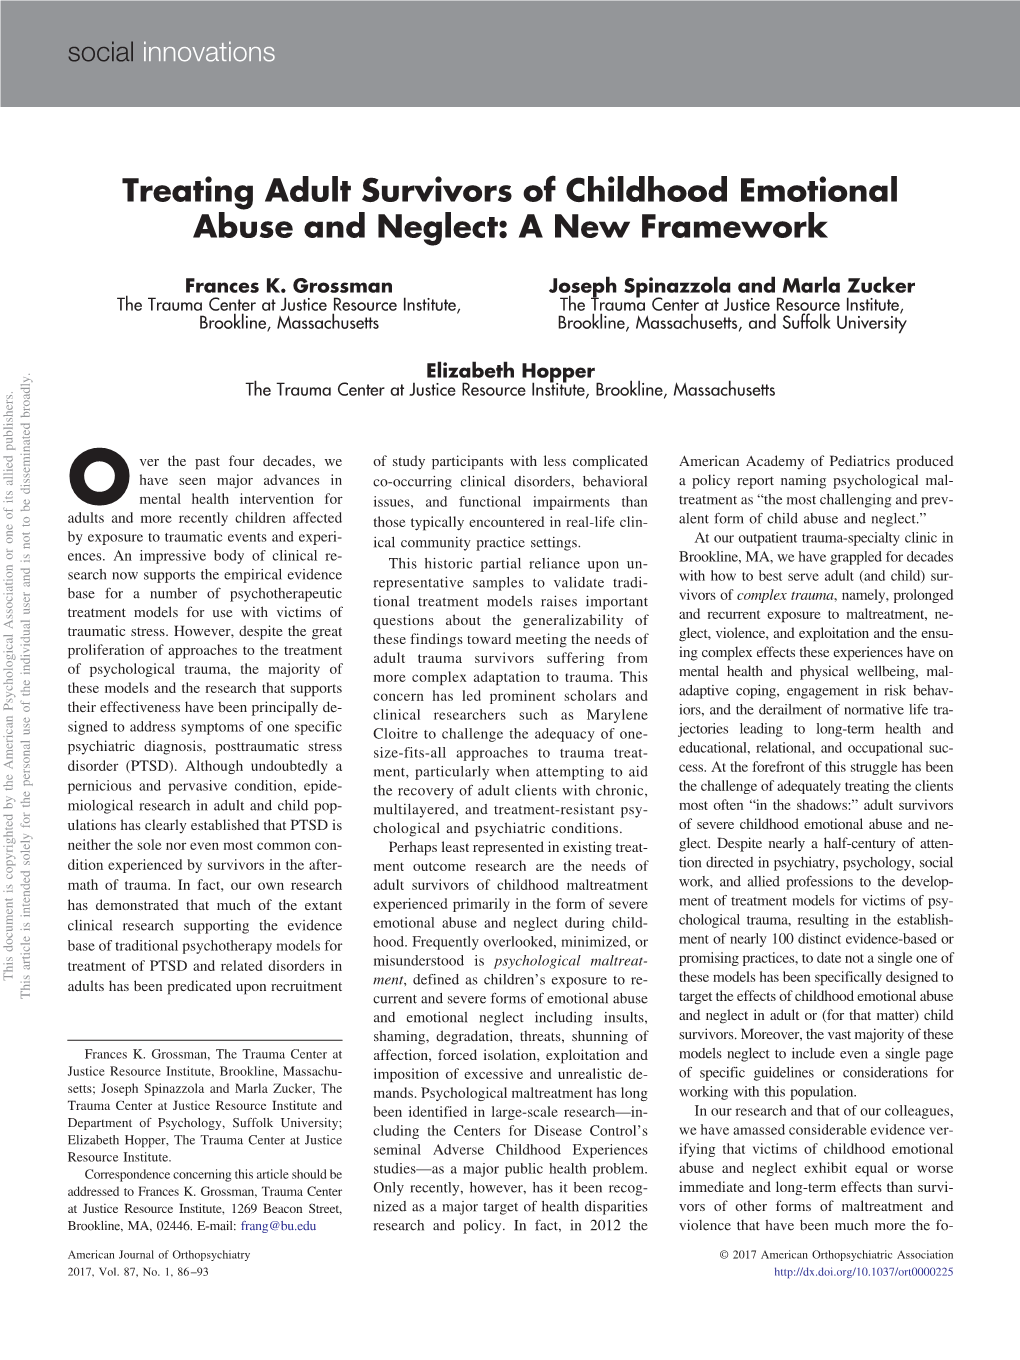 Treating Adult Survivors of Childhood Emotional Abuse and Neglect: a New Framework